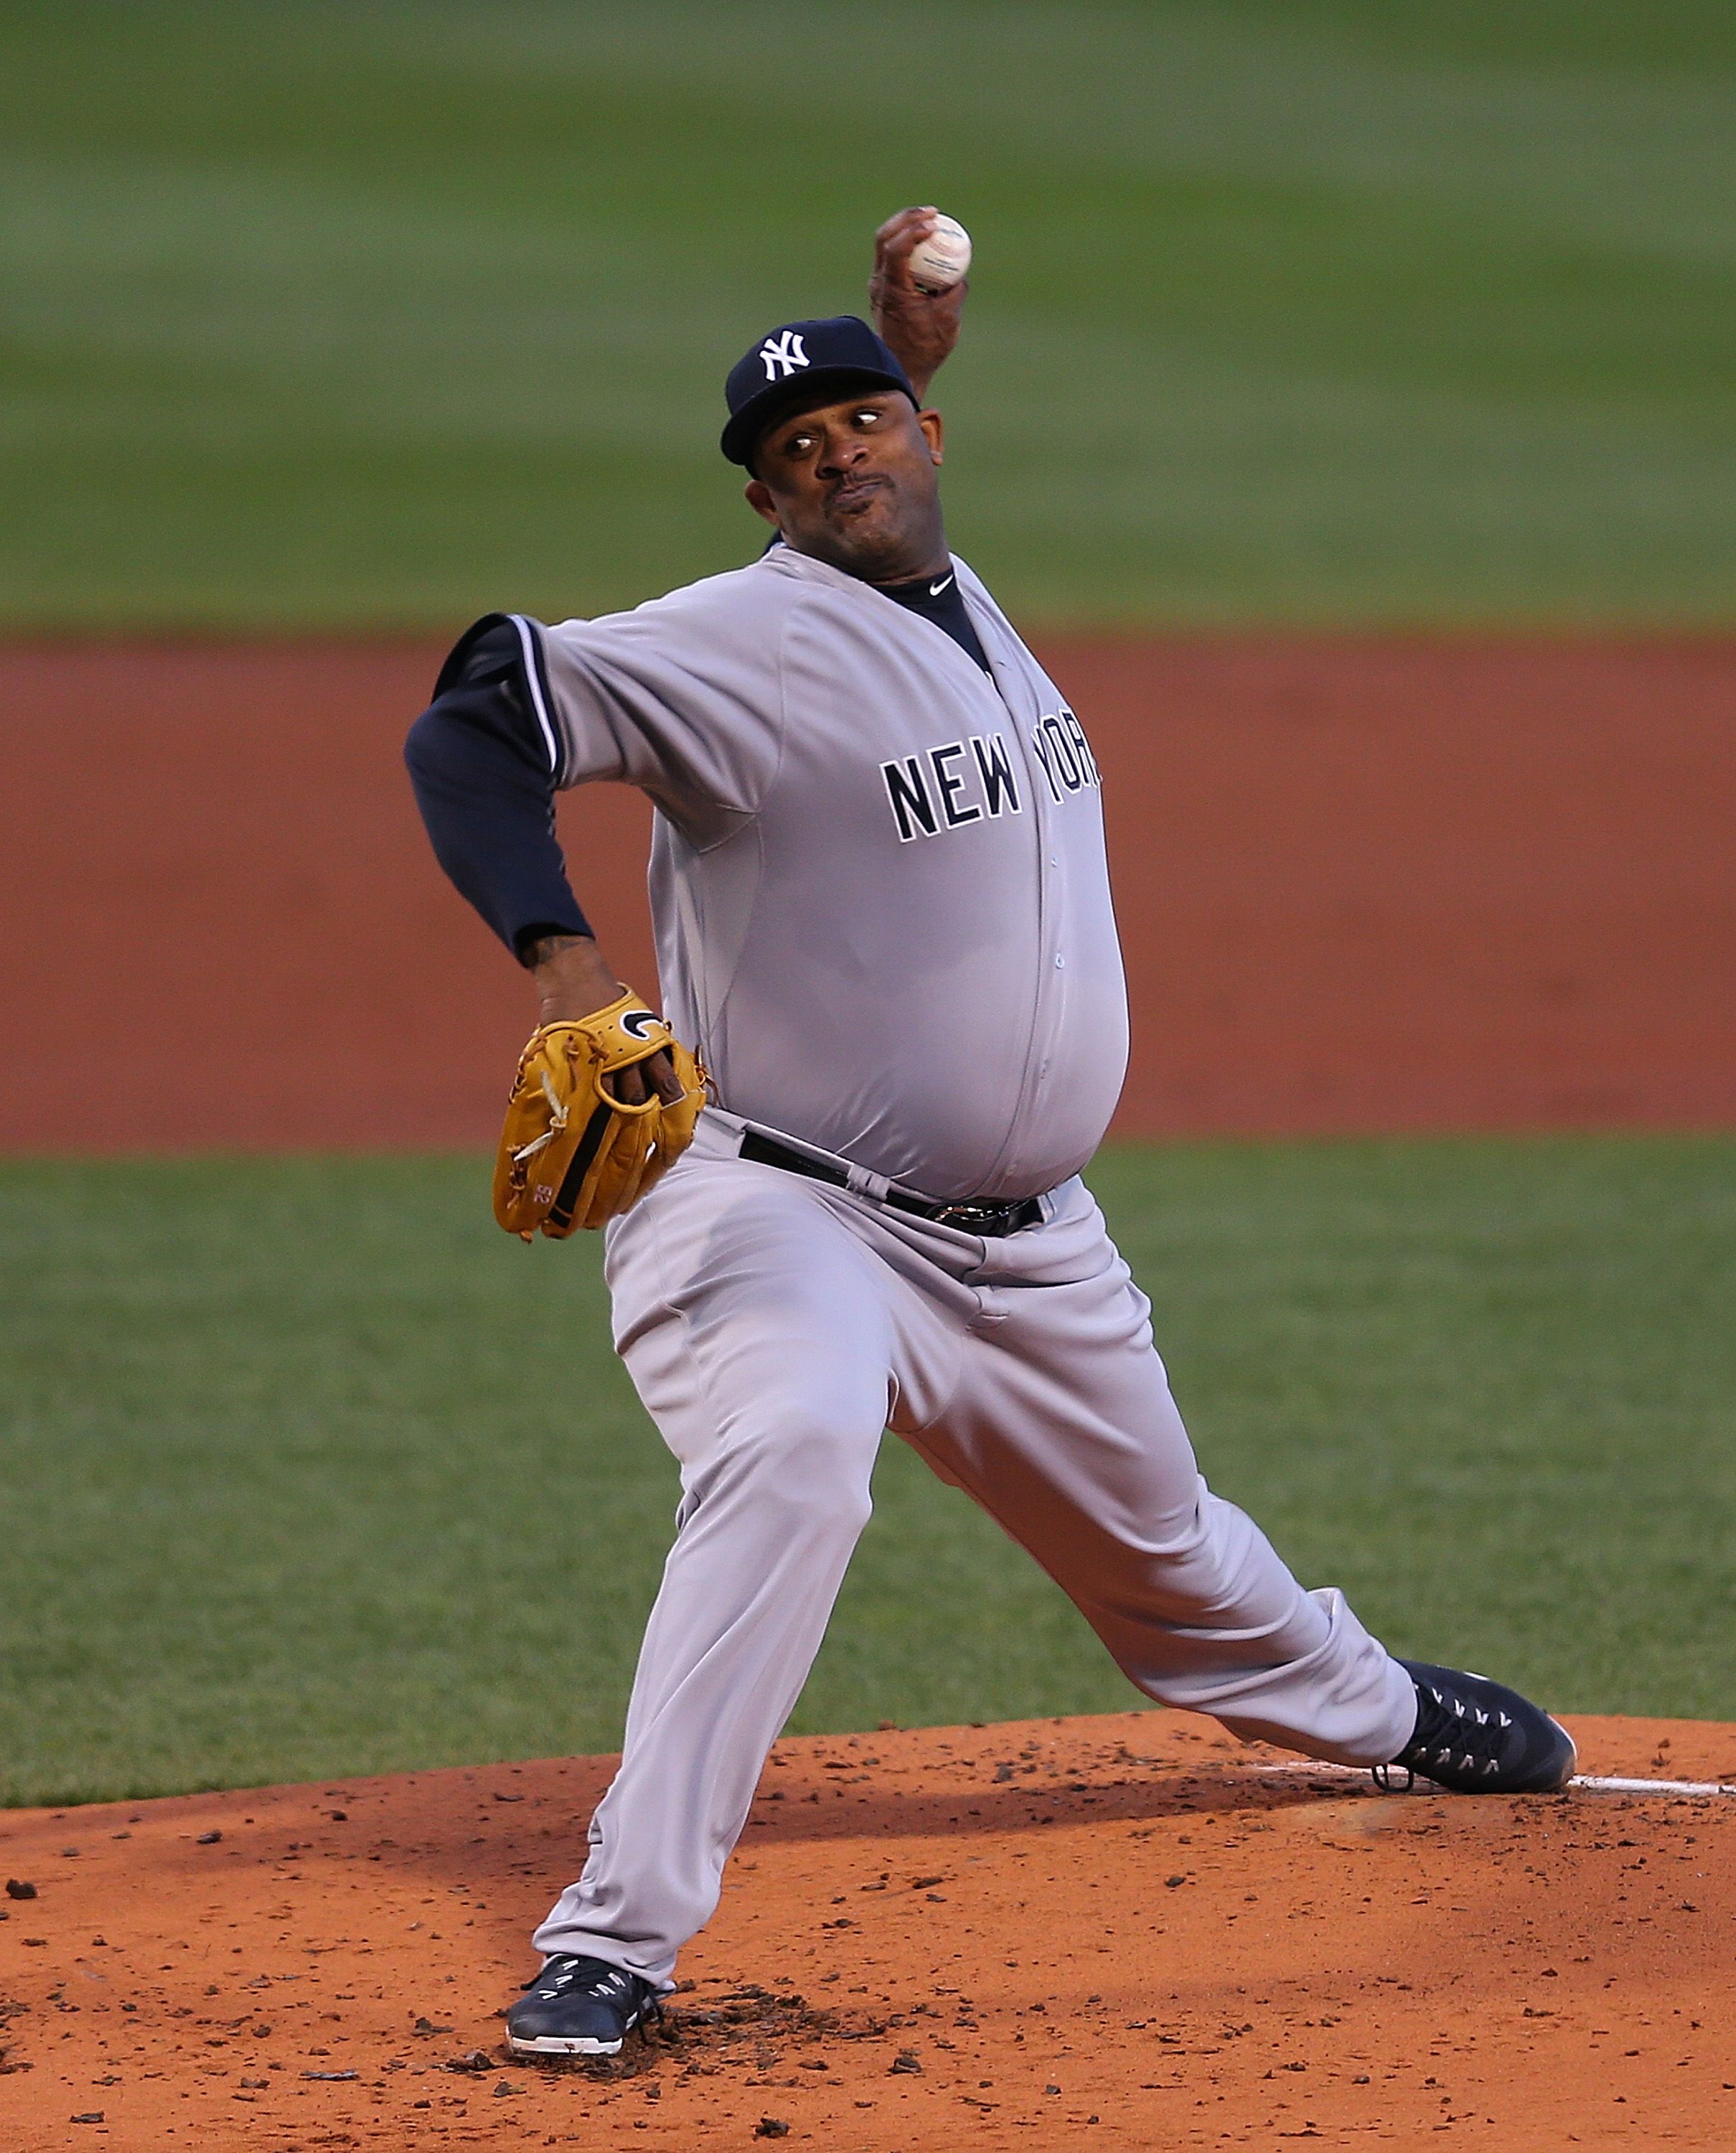 Can 'obese' athletes cut it at the top?